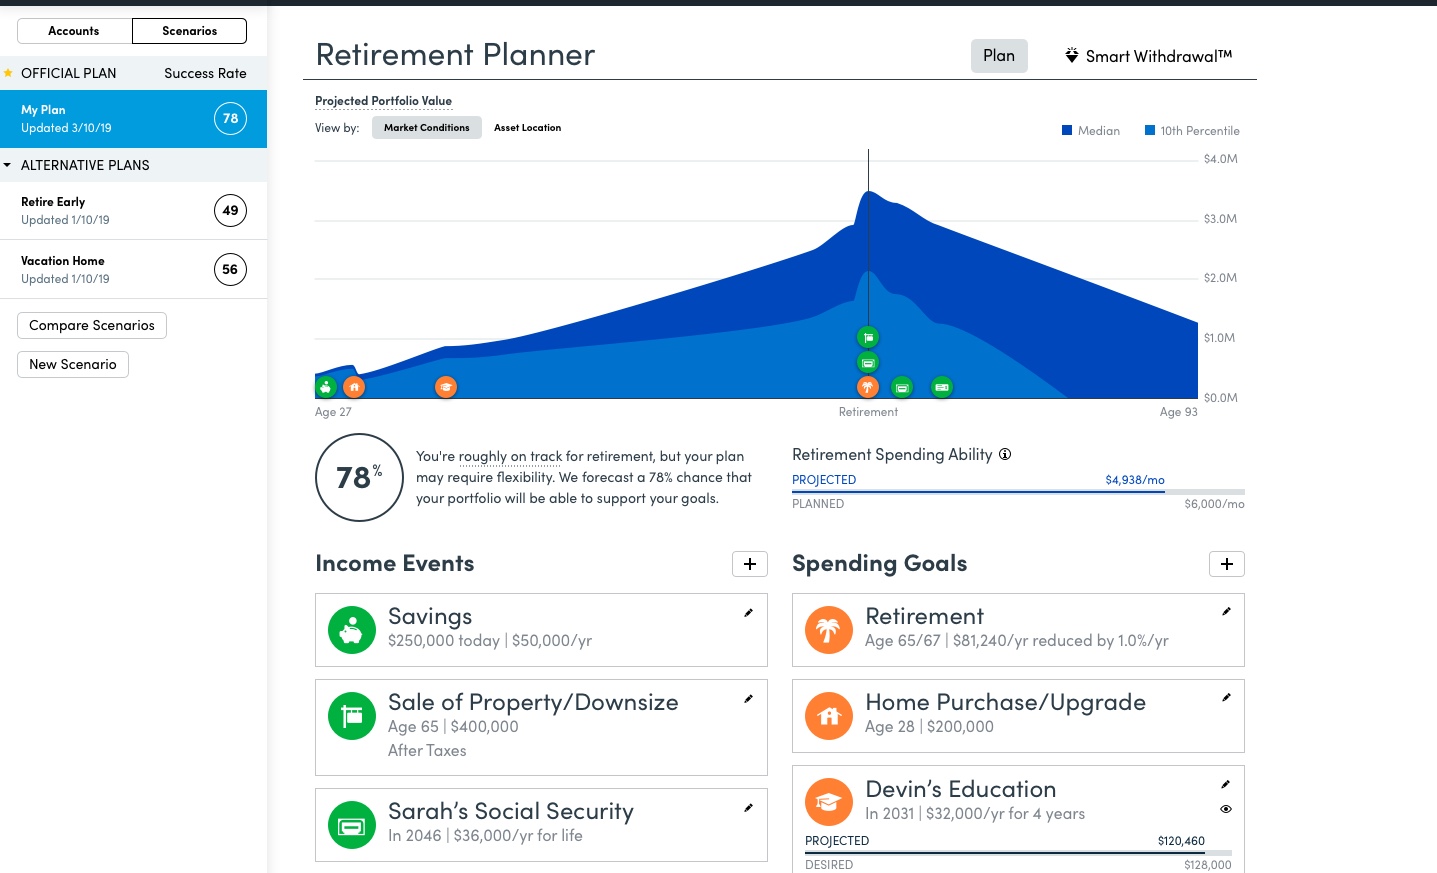 Betterment Investment Review
